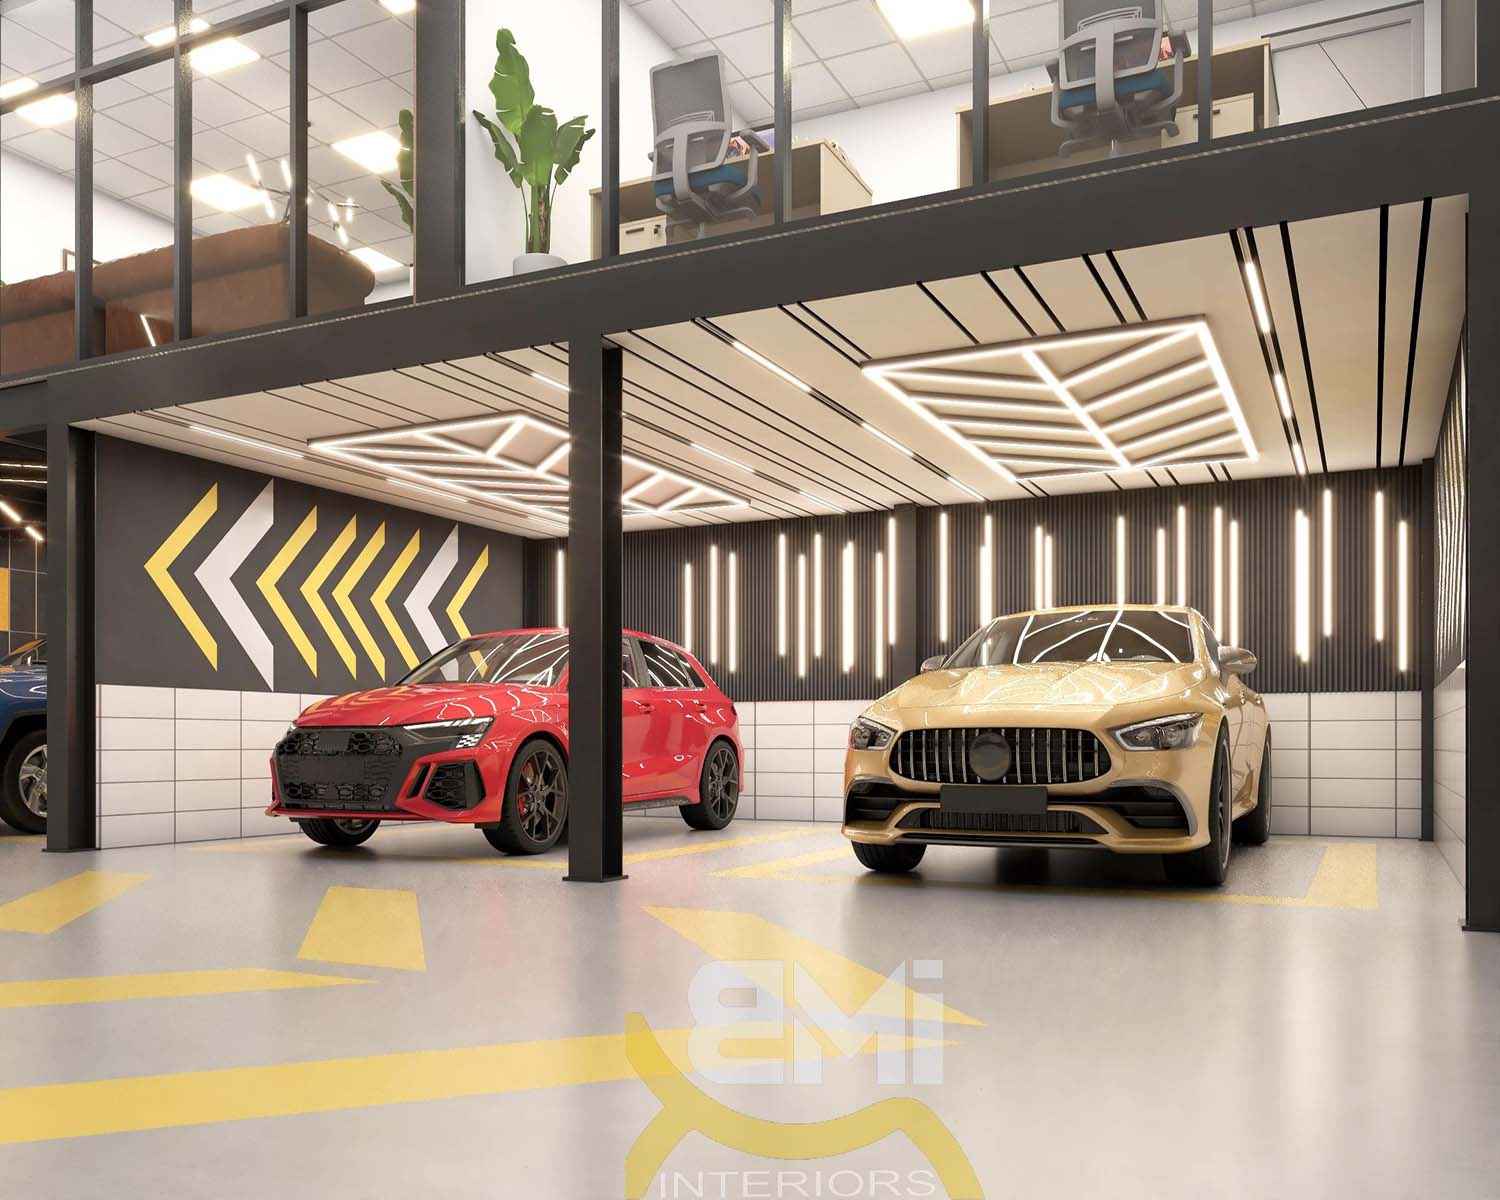 3d image of car wash area interior with glass partition, 2 luxury cars parked under the partition